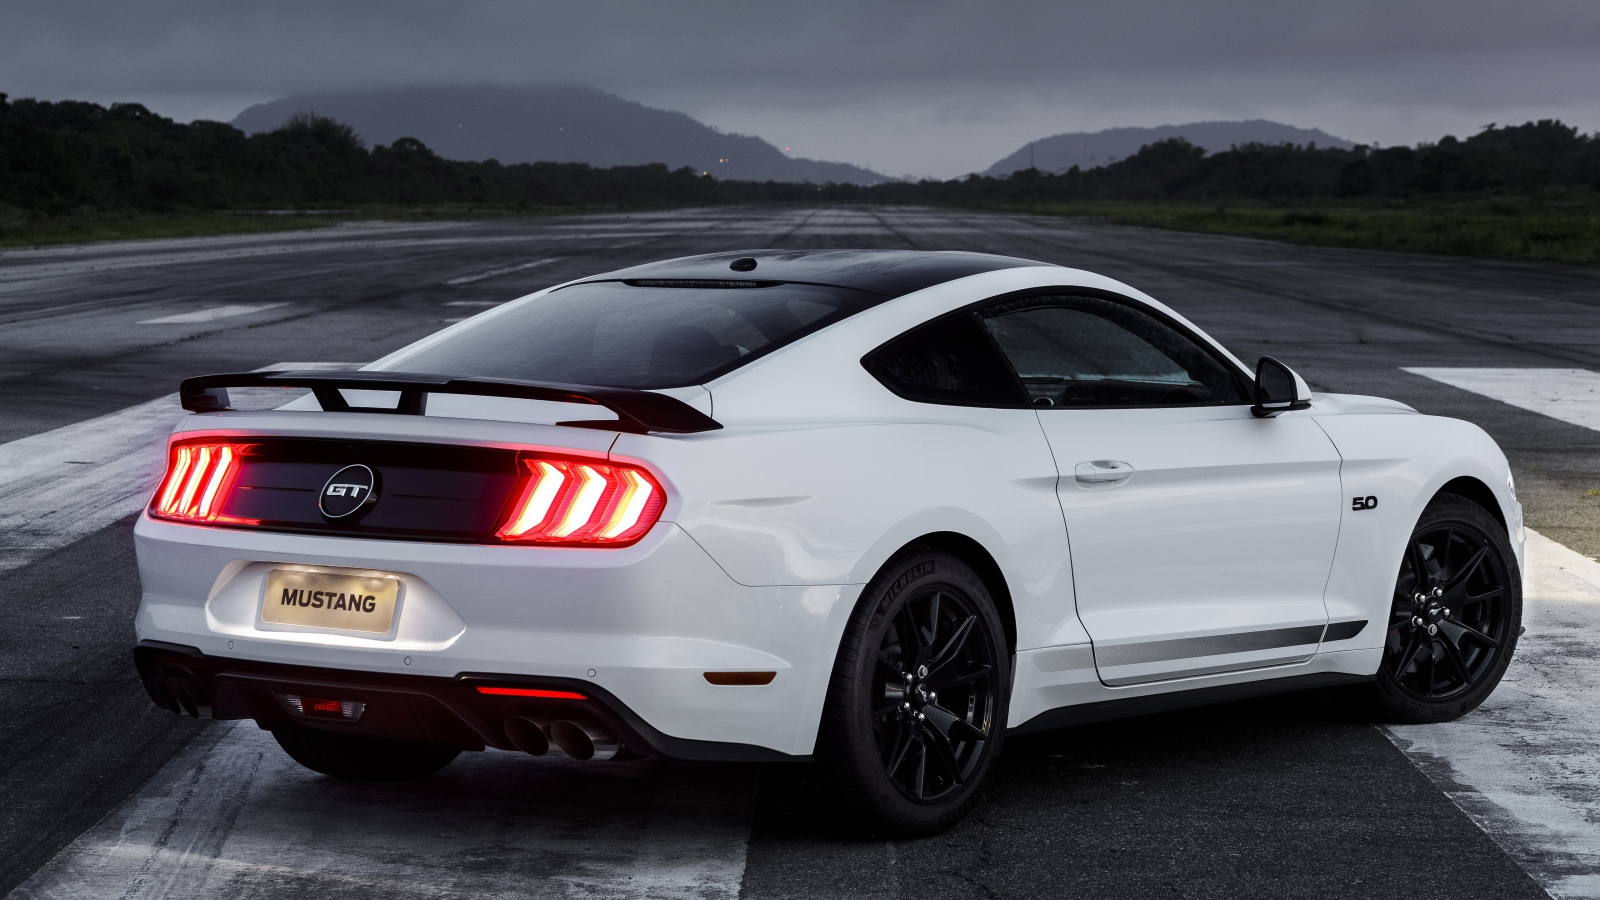 White Ford Mustang GT car, 2019 rear view